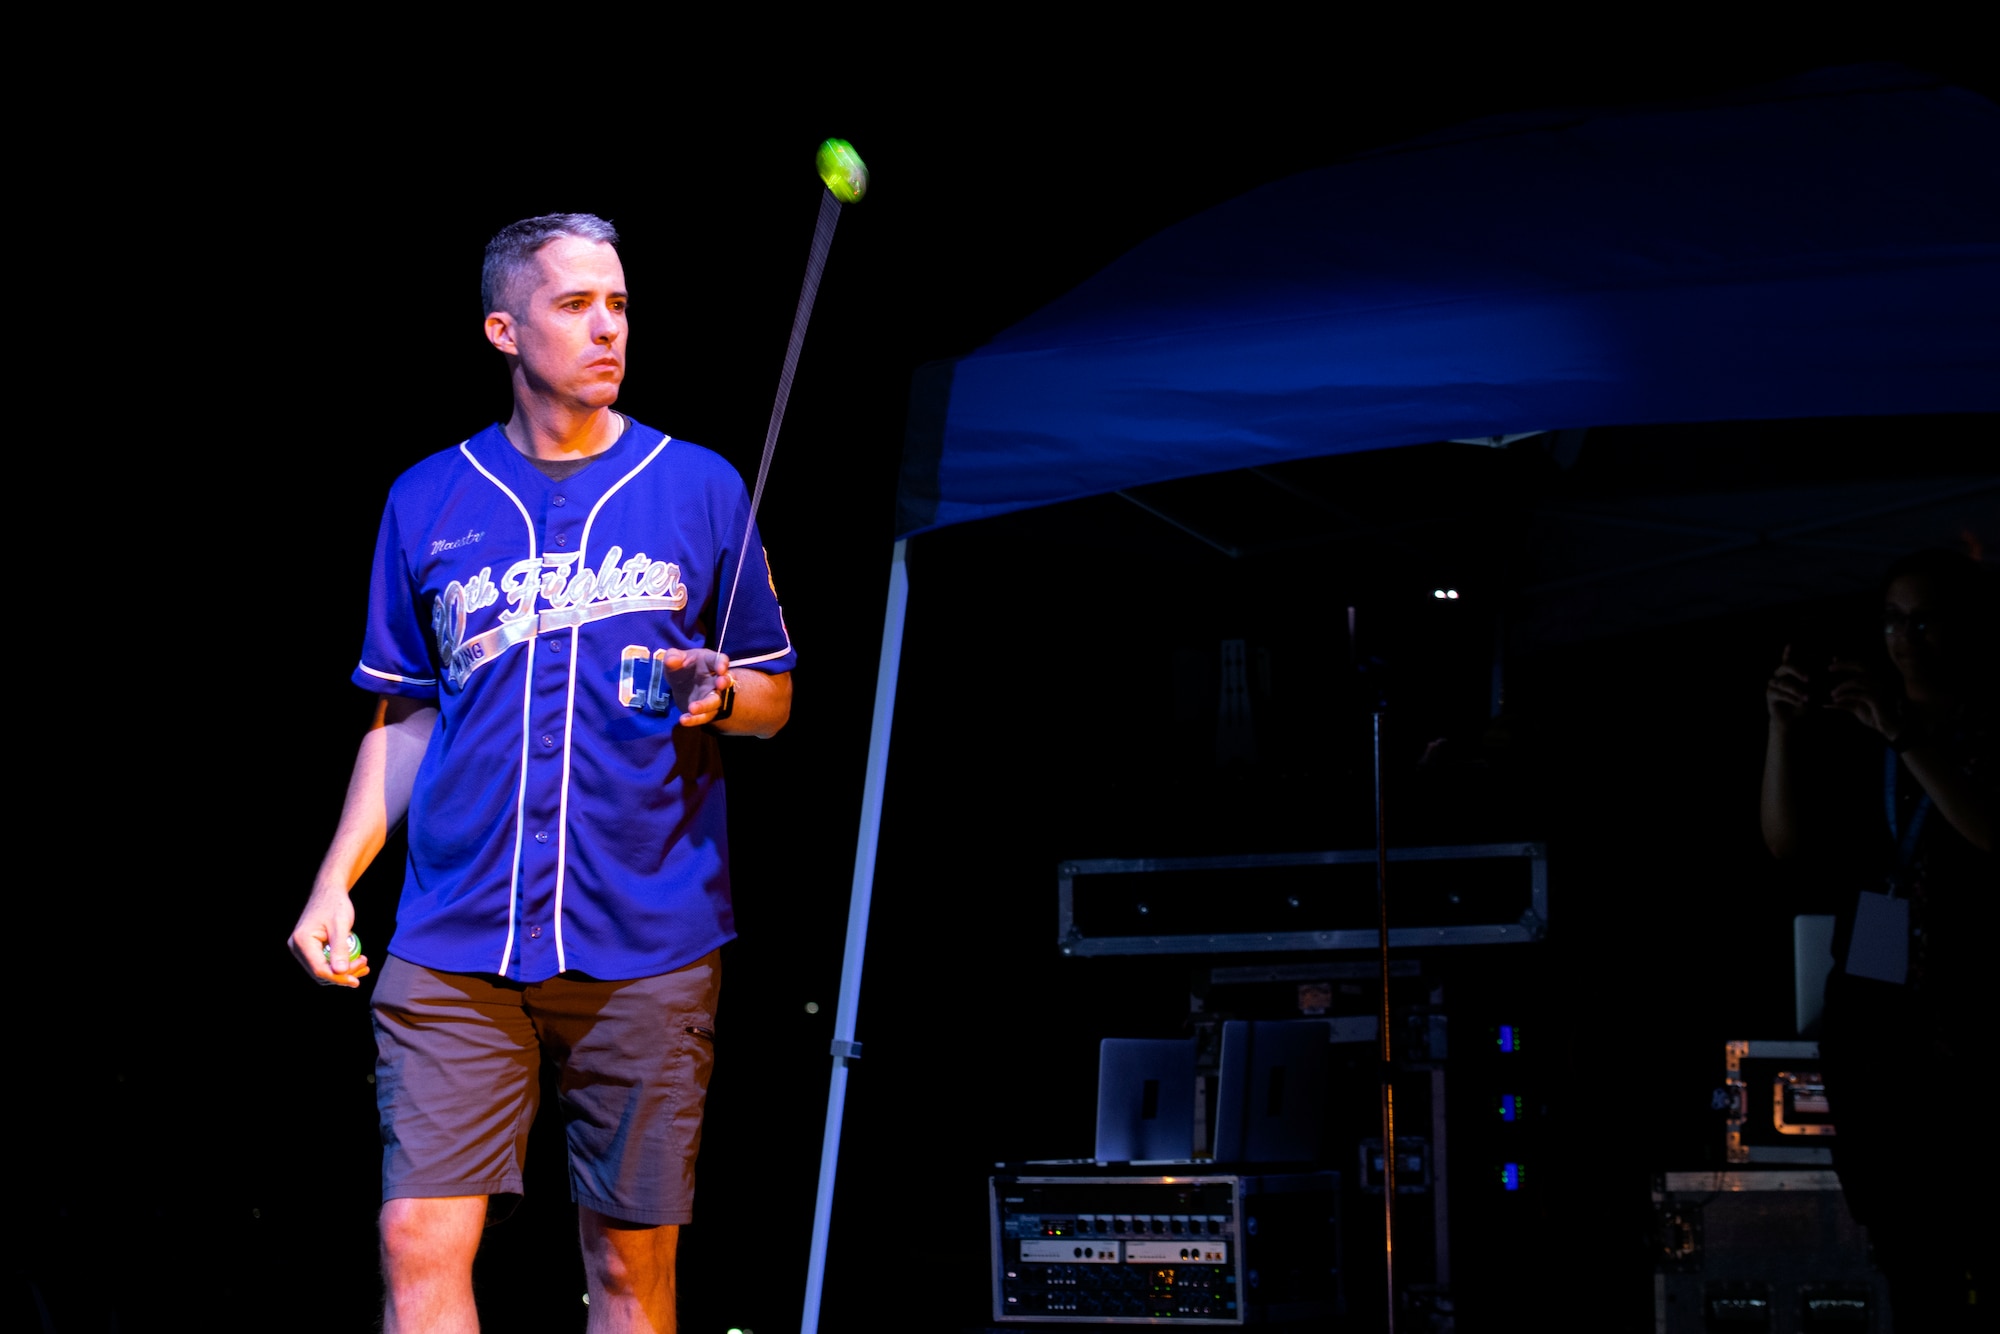 U.S. Air Force Col. Derek O’Malley, 20th Fighter Wing commander, performs on stage during the 20th Force Support Squadron’s annual Freedom Bash at Shaw Air Force Base, South Carolina, June 29, 2019.